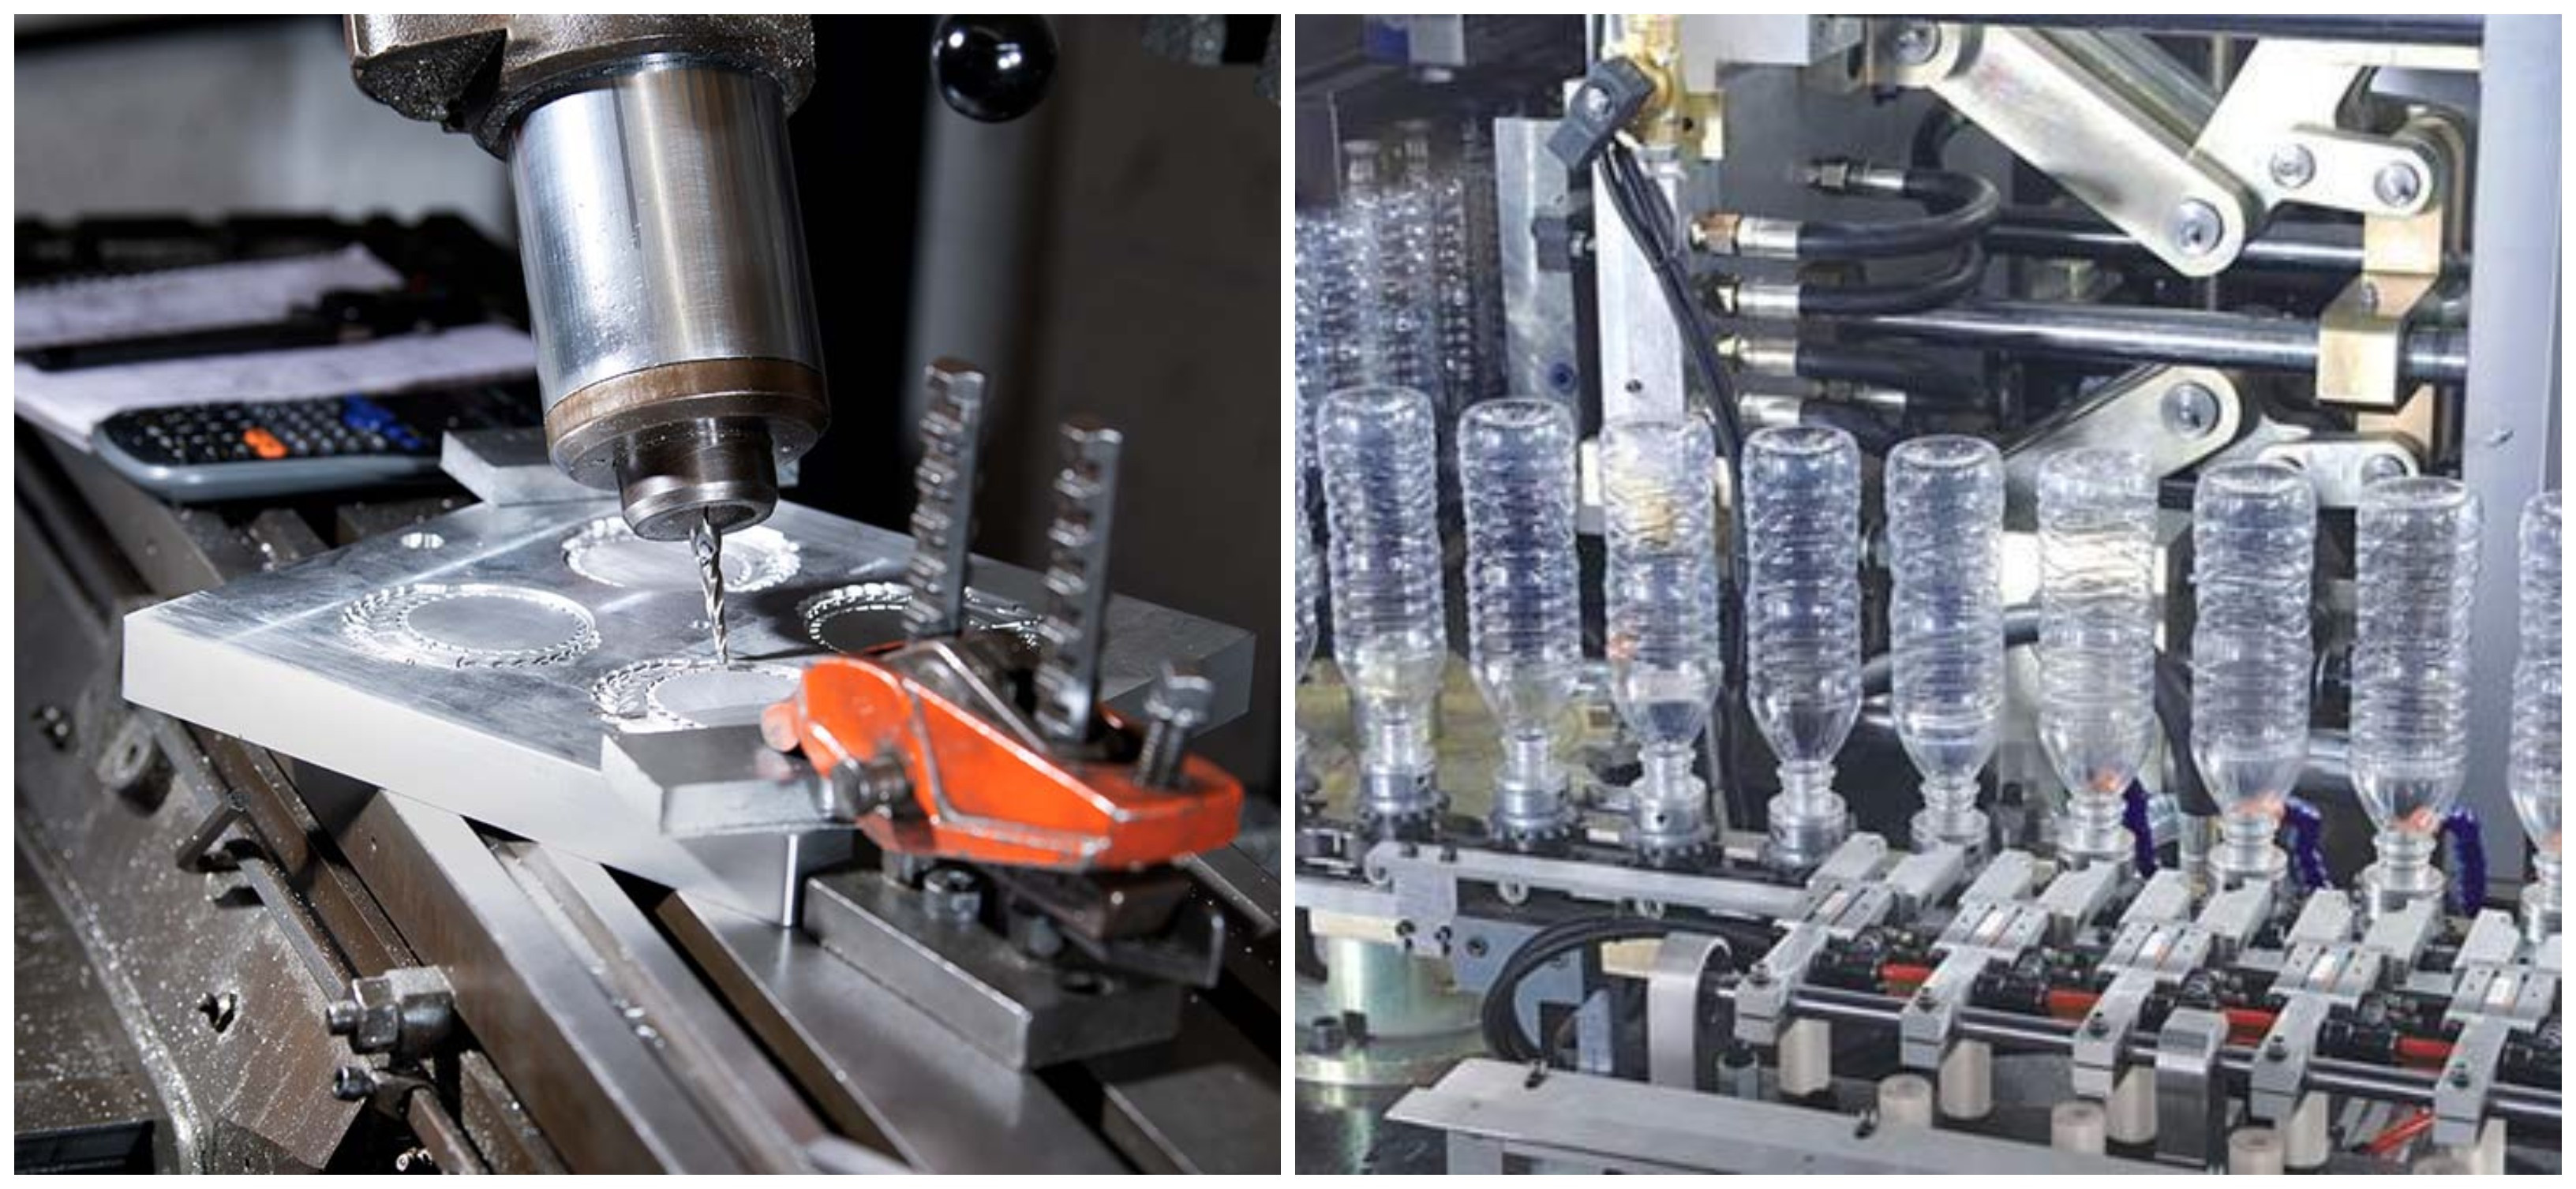 Injection Moulding or Blow Moulding? Here’s How These Two Production Processes Compare